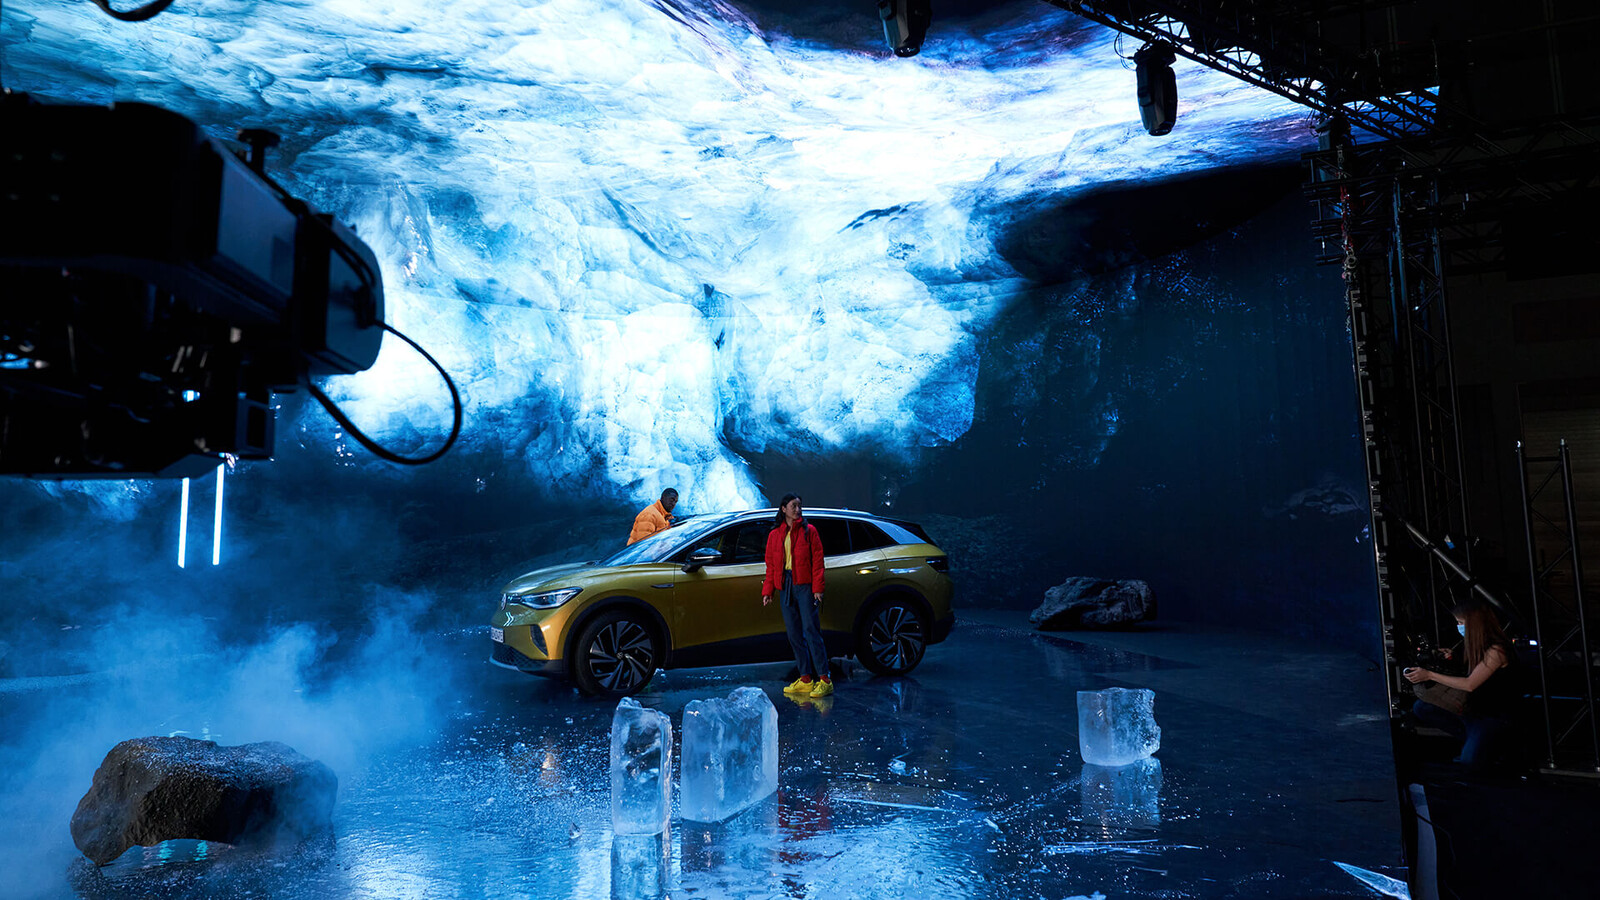 A picture of the Ice cave within the hyperbowl, taken from this article https://www.unrealengine.com/en-US/spotlights/volkswagen-turns-to-virtual-production-for-greener-car-commercials?fbclid=IwAR3qz4E_c05AYcIEArsWShf4nF3PK8YtHpp9T08aFniKseIsyM2cwkP5WoY
